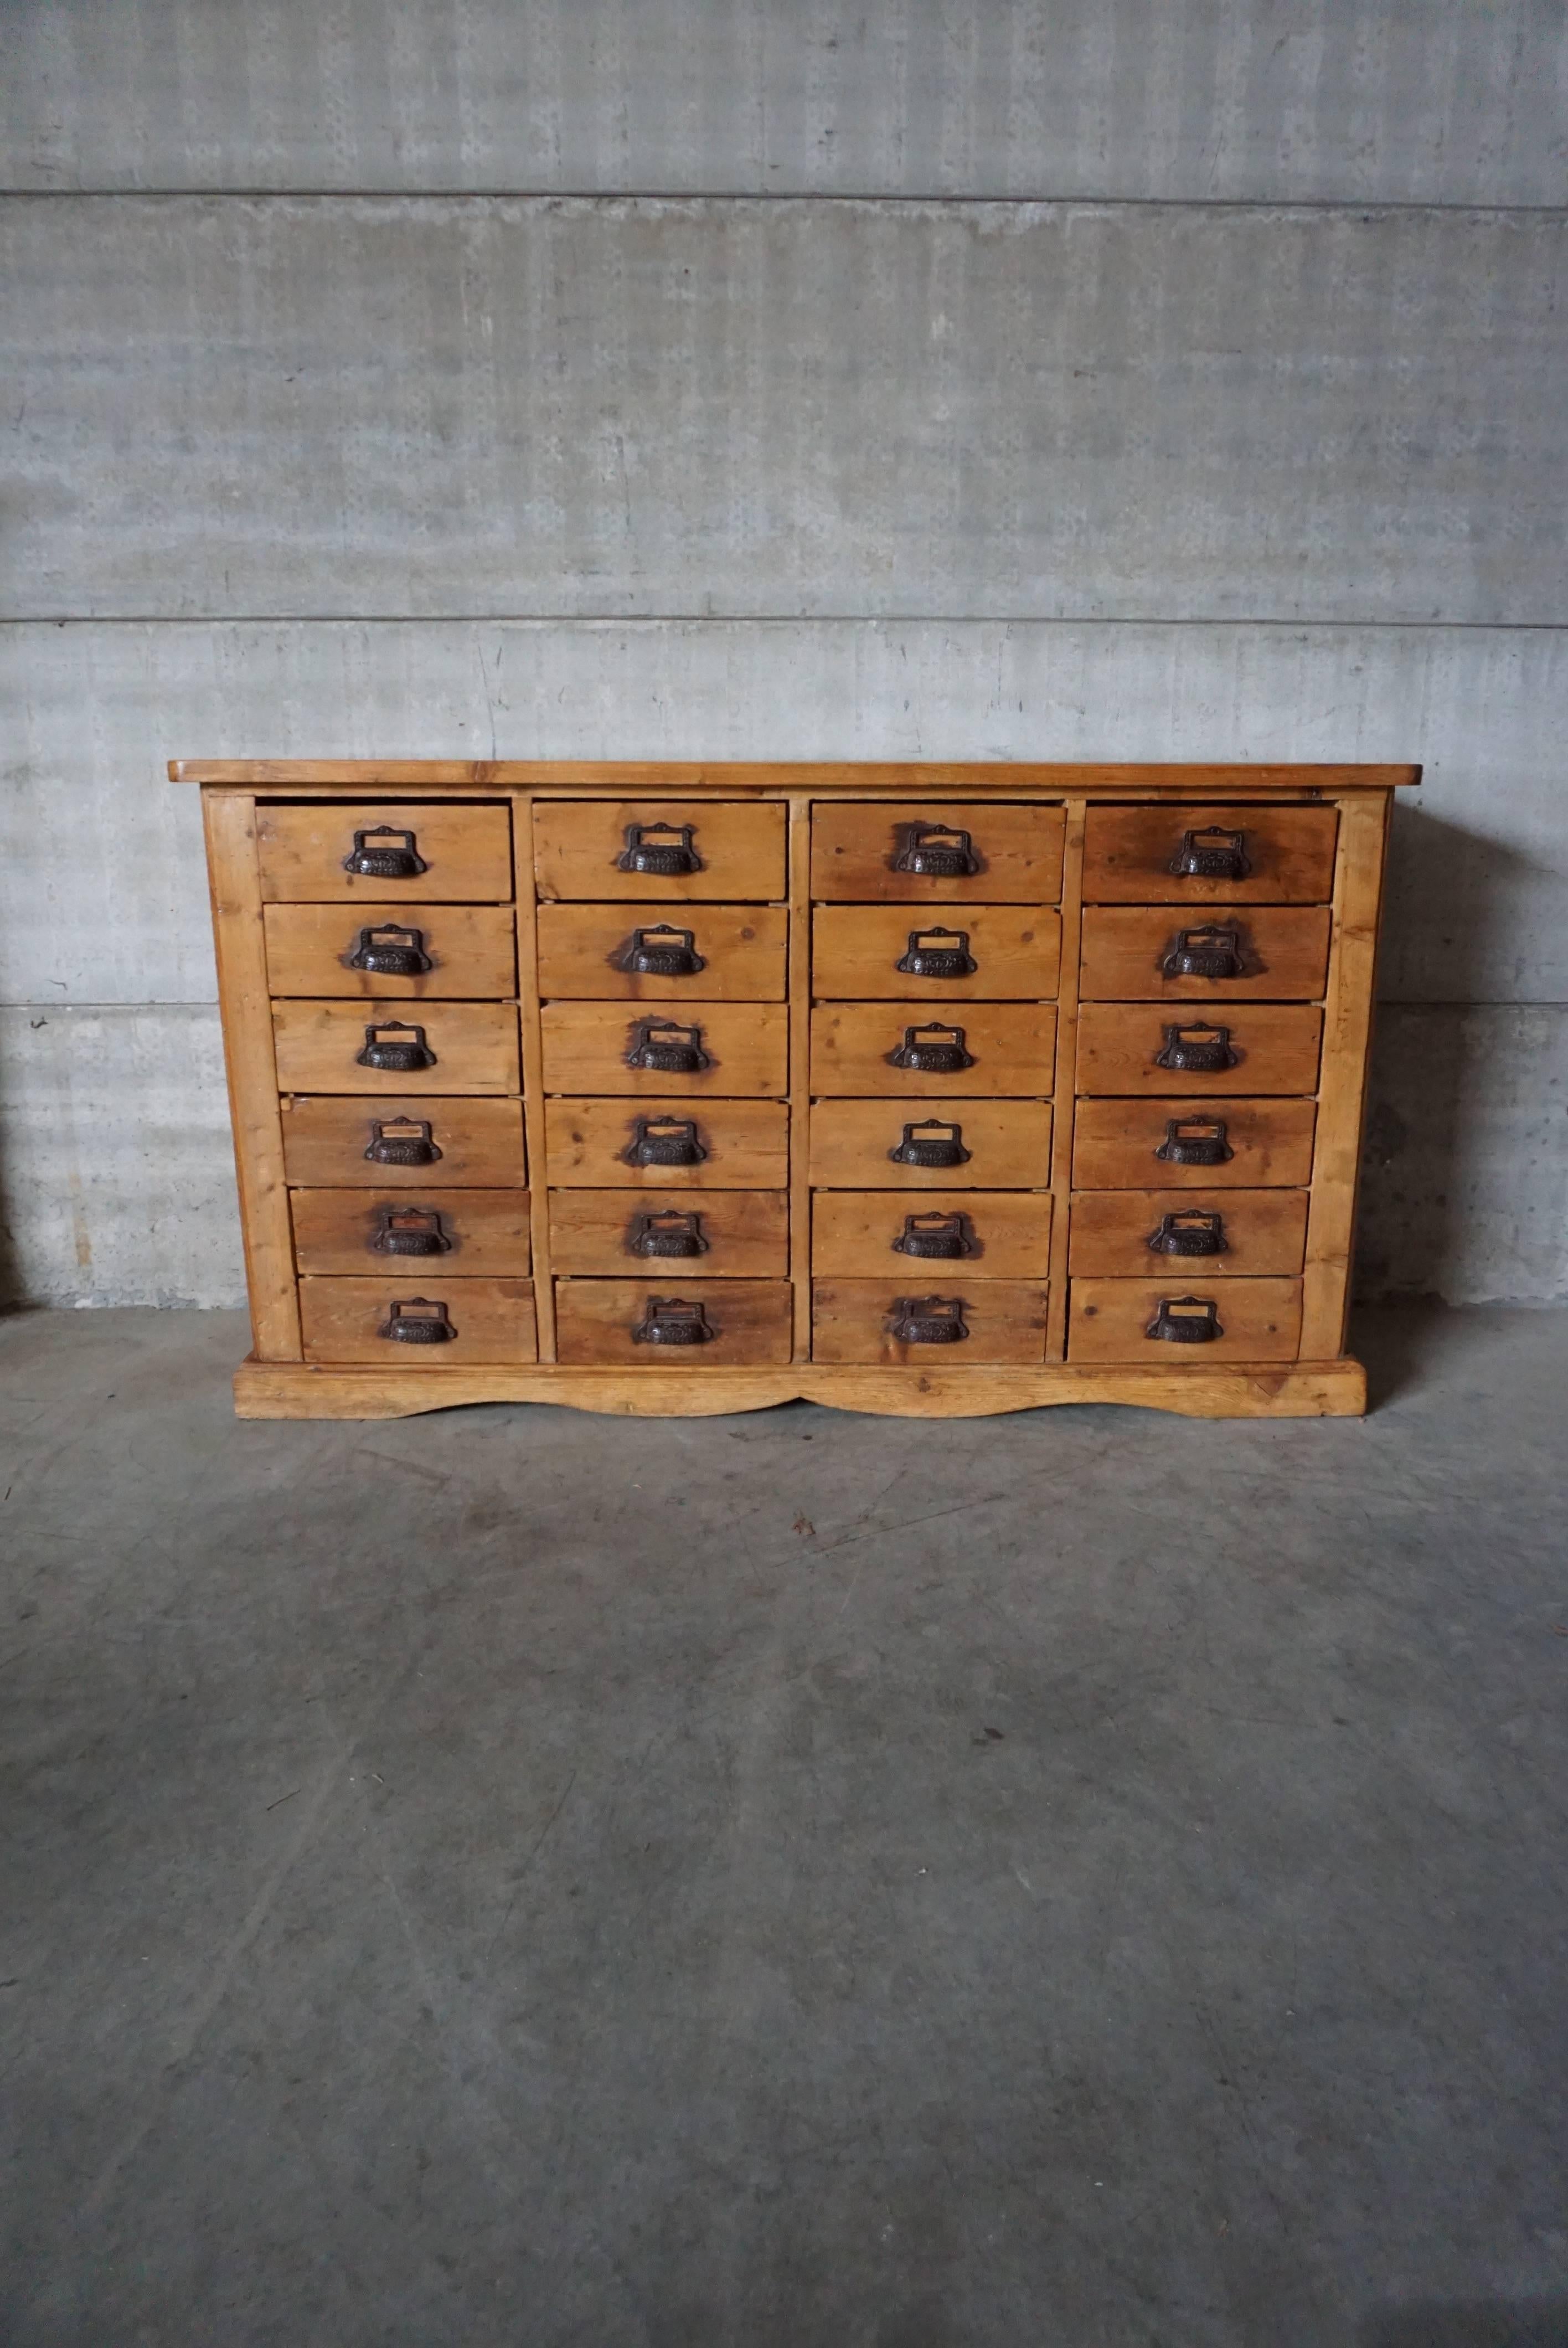 This apothecary bank of drawers was designed and made in circa 1900. It is made from pine with cast iron handles. The cabinet has retained a rich patina with some natural distressing.